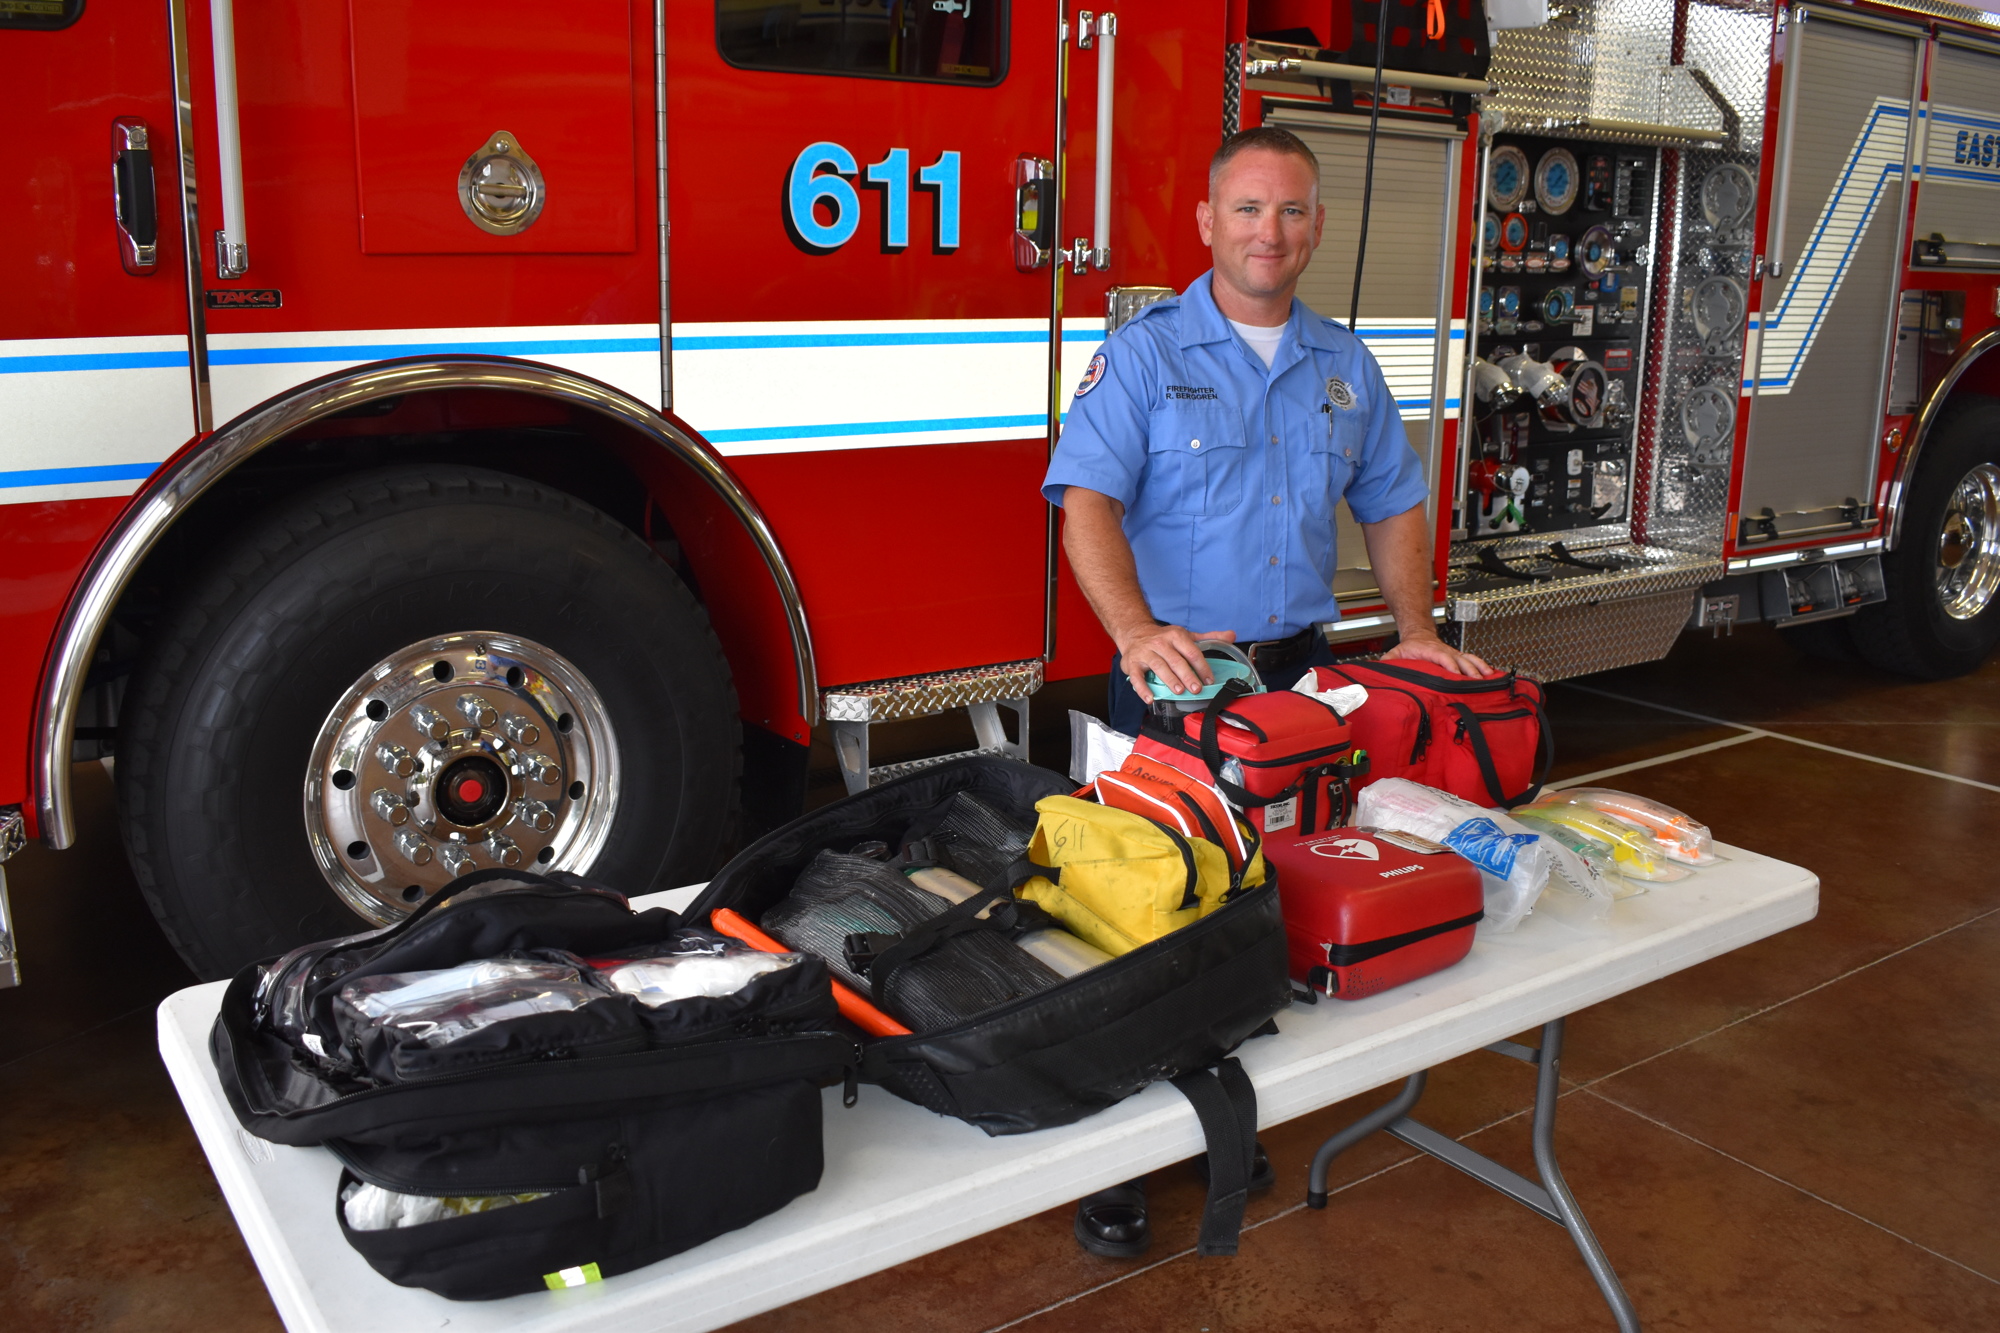 Firefighter Ryan Berggren demonstrates the basic life support equipment currently used by all firefighters. (File photo)